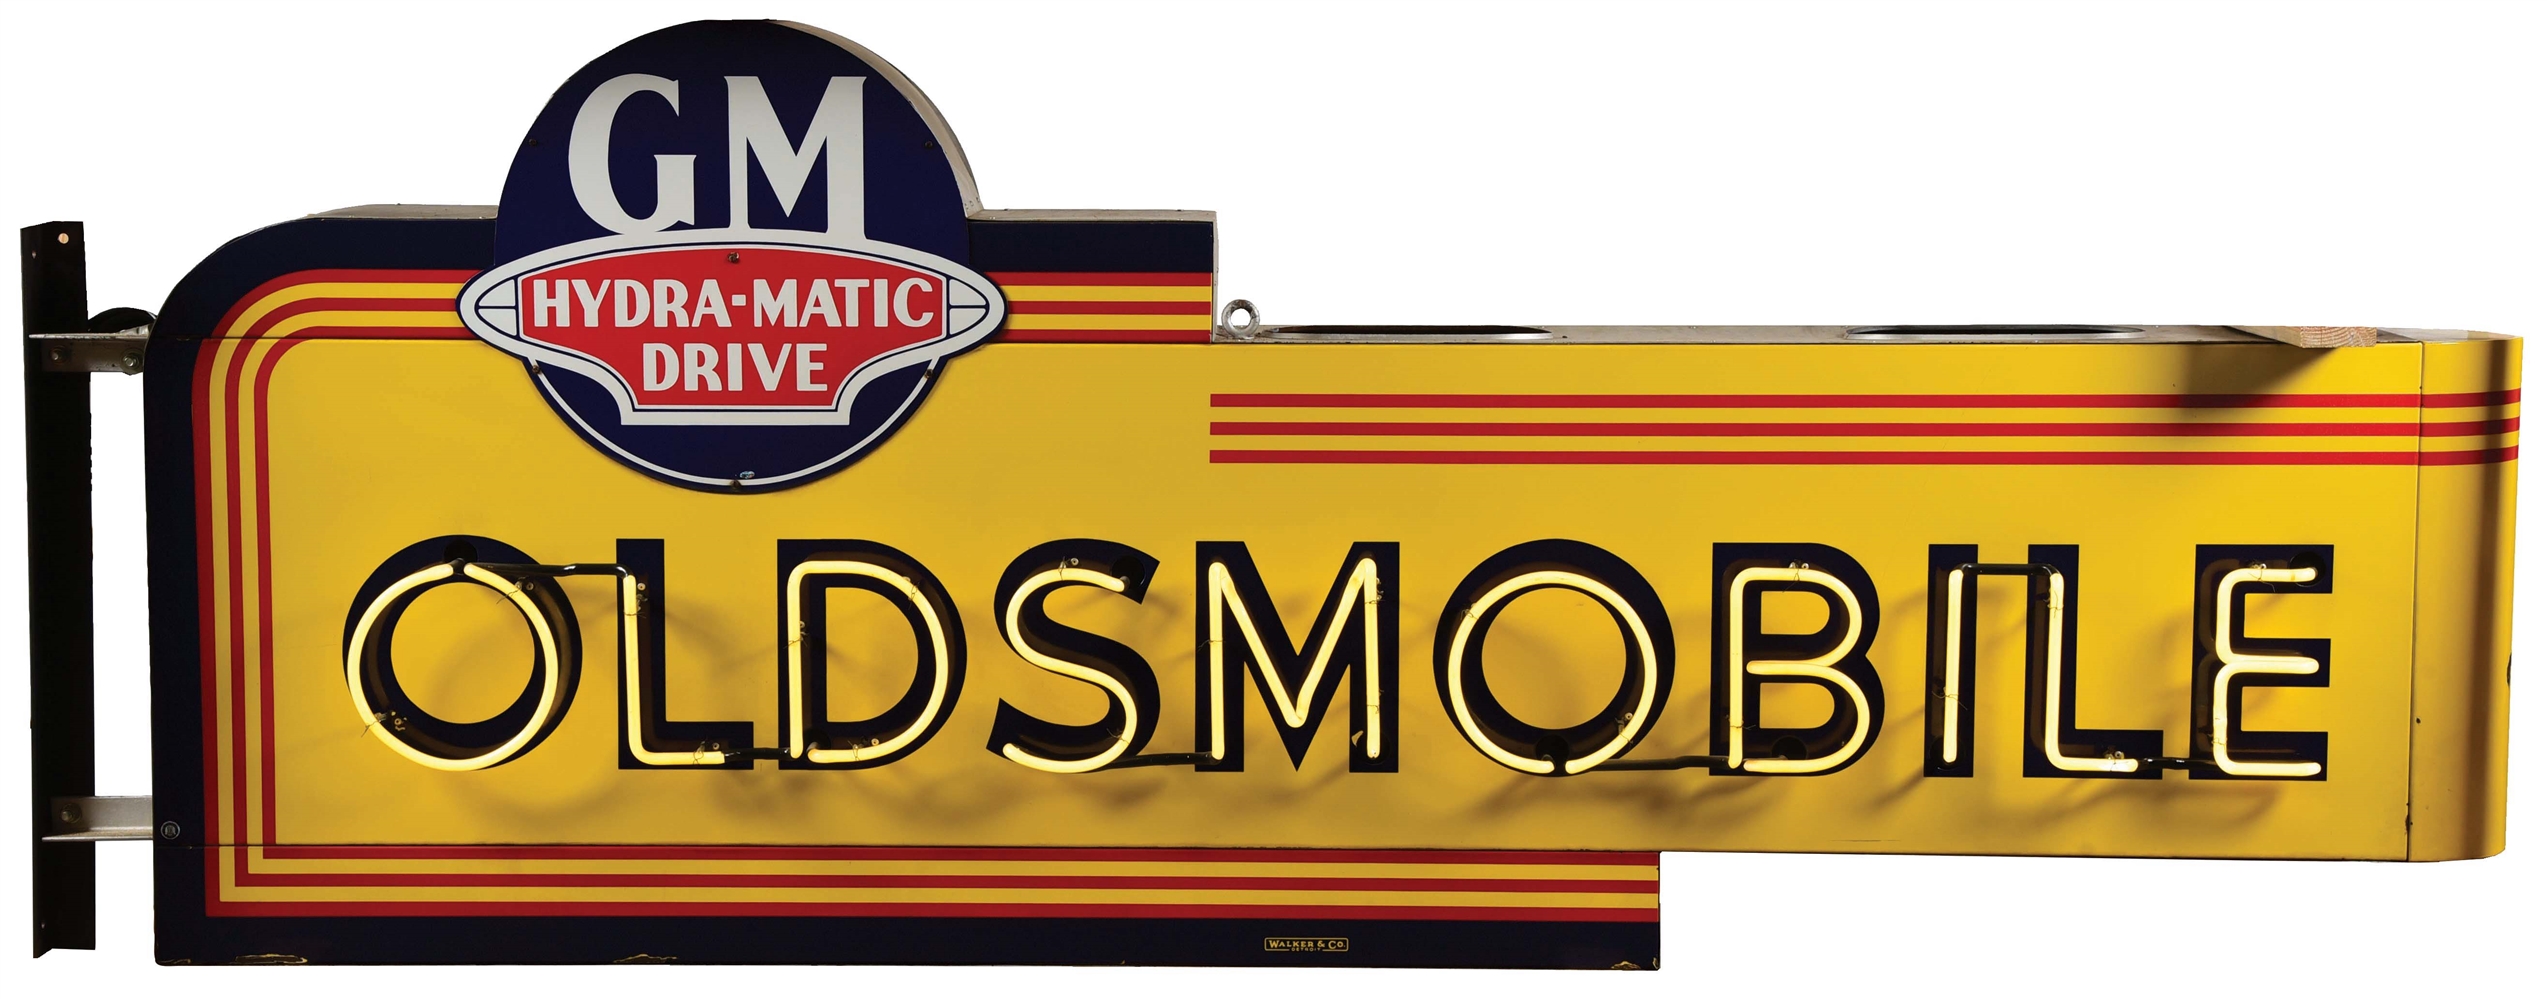 OLDSMOBILE GM HYDRA MATIC DRIVE COMPLETE PORCELAIN NEON SIGN W/ BULLNOSE ATTACHMENT. 